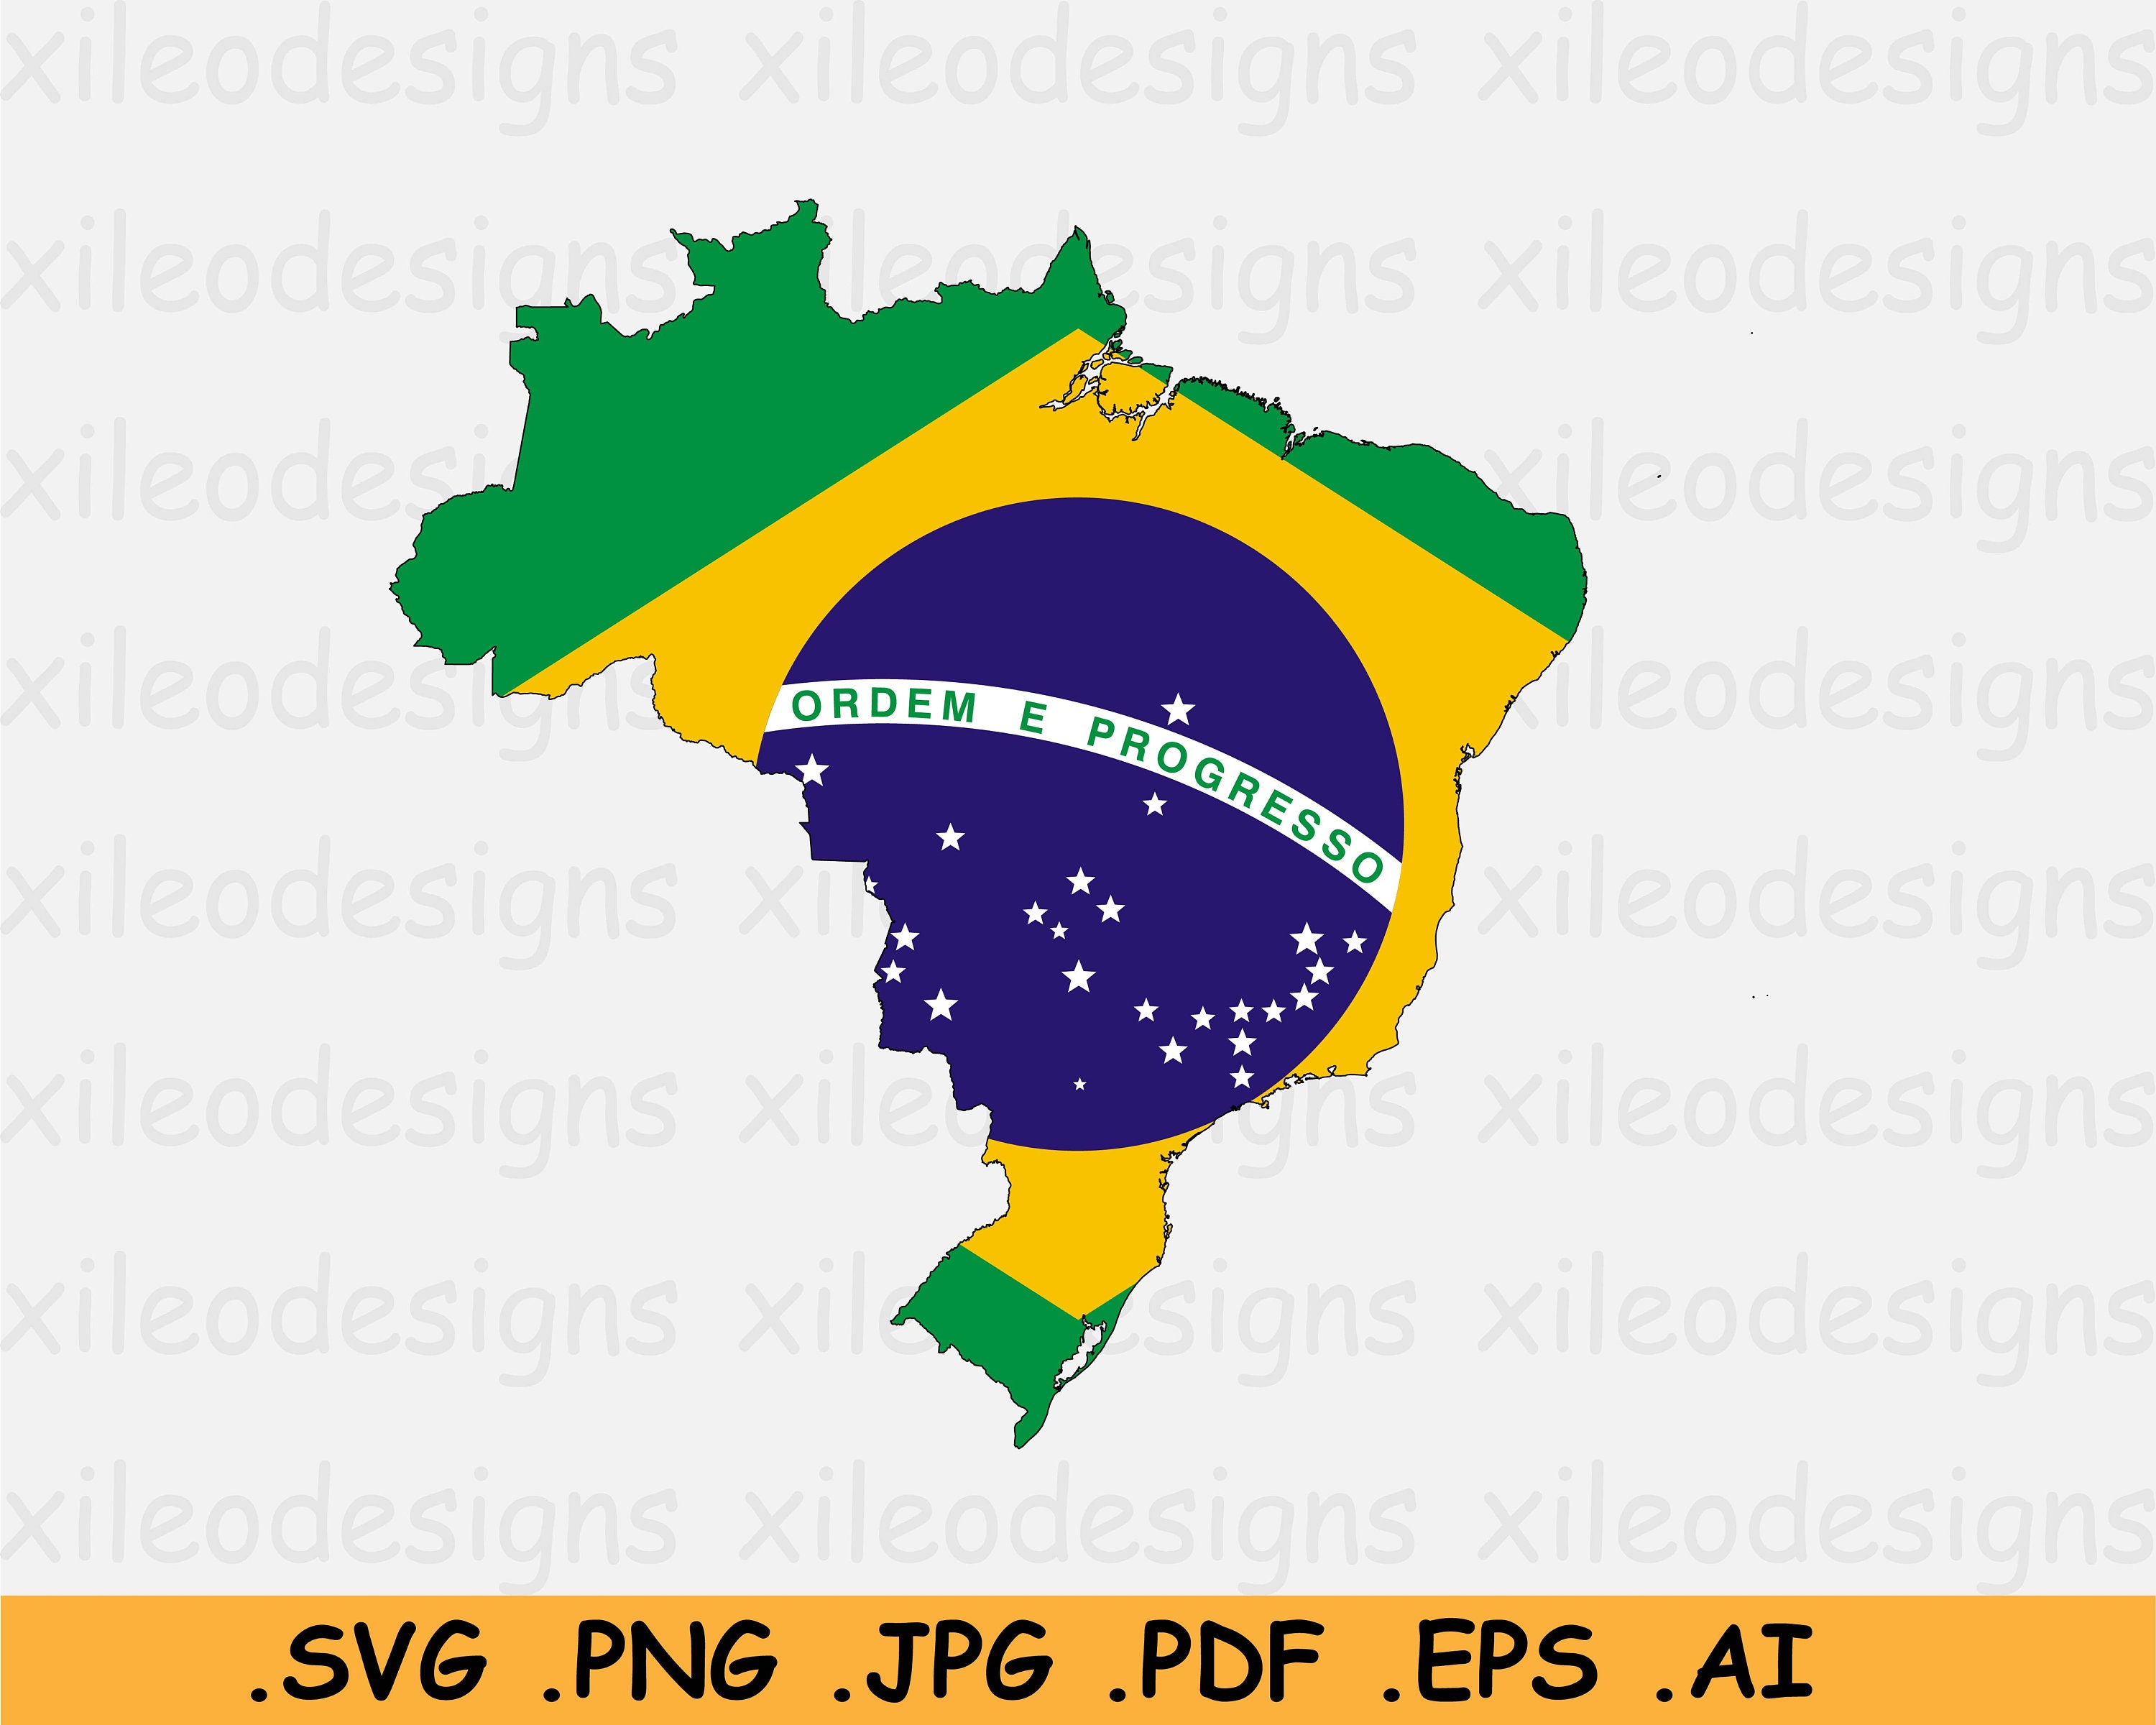 Flags of Brazilian States - With State Shapes